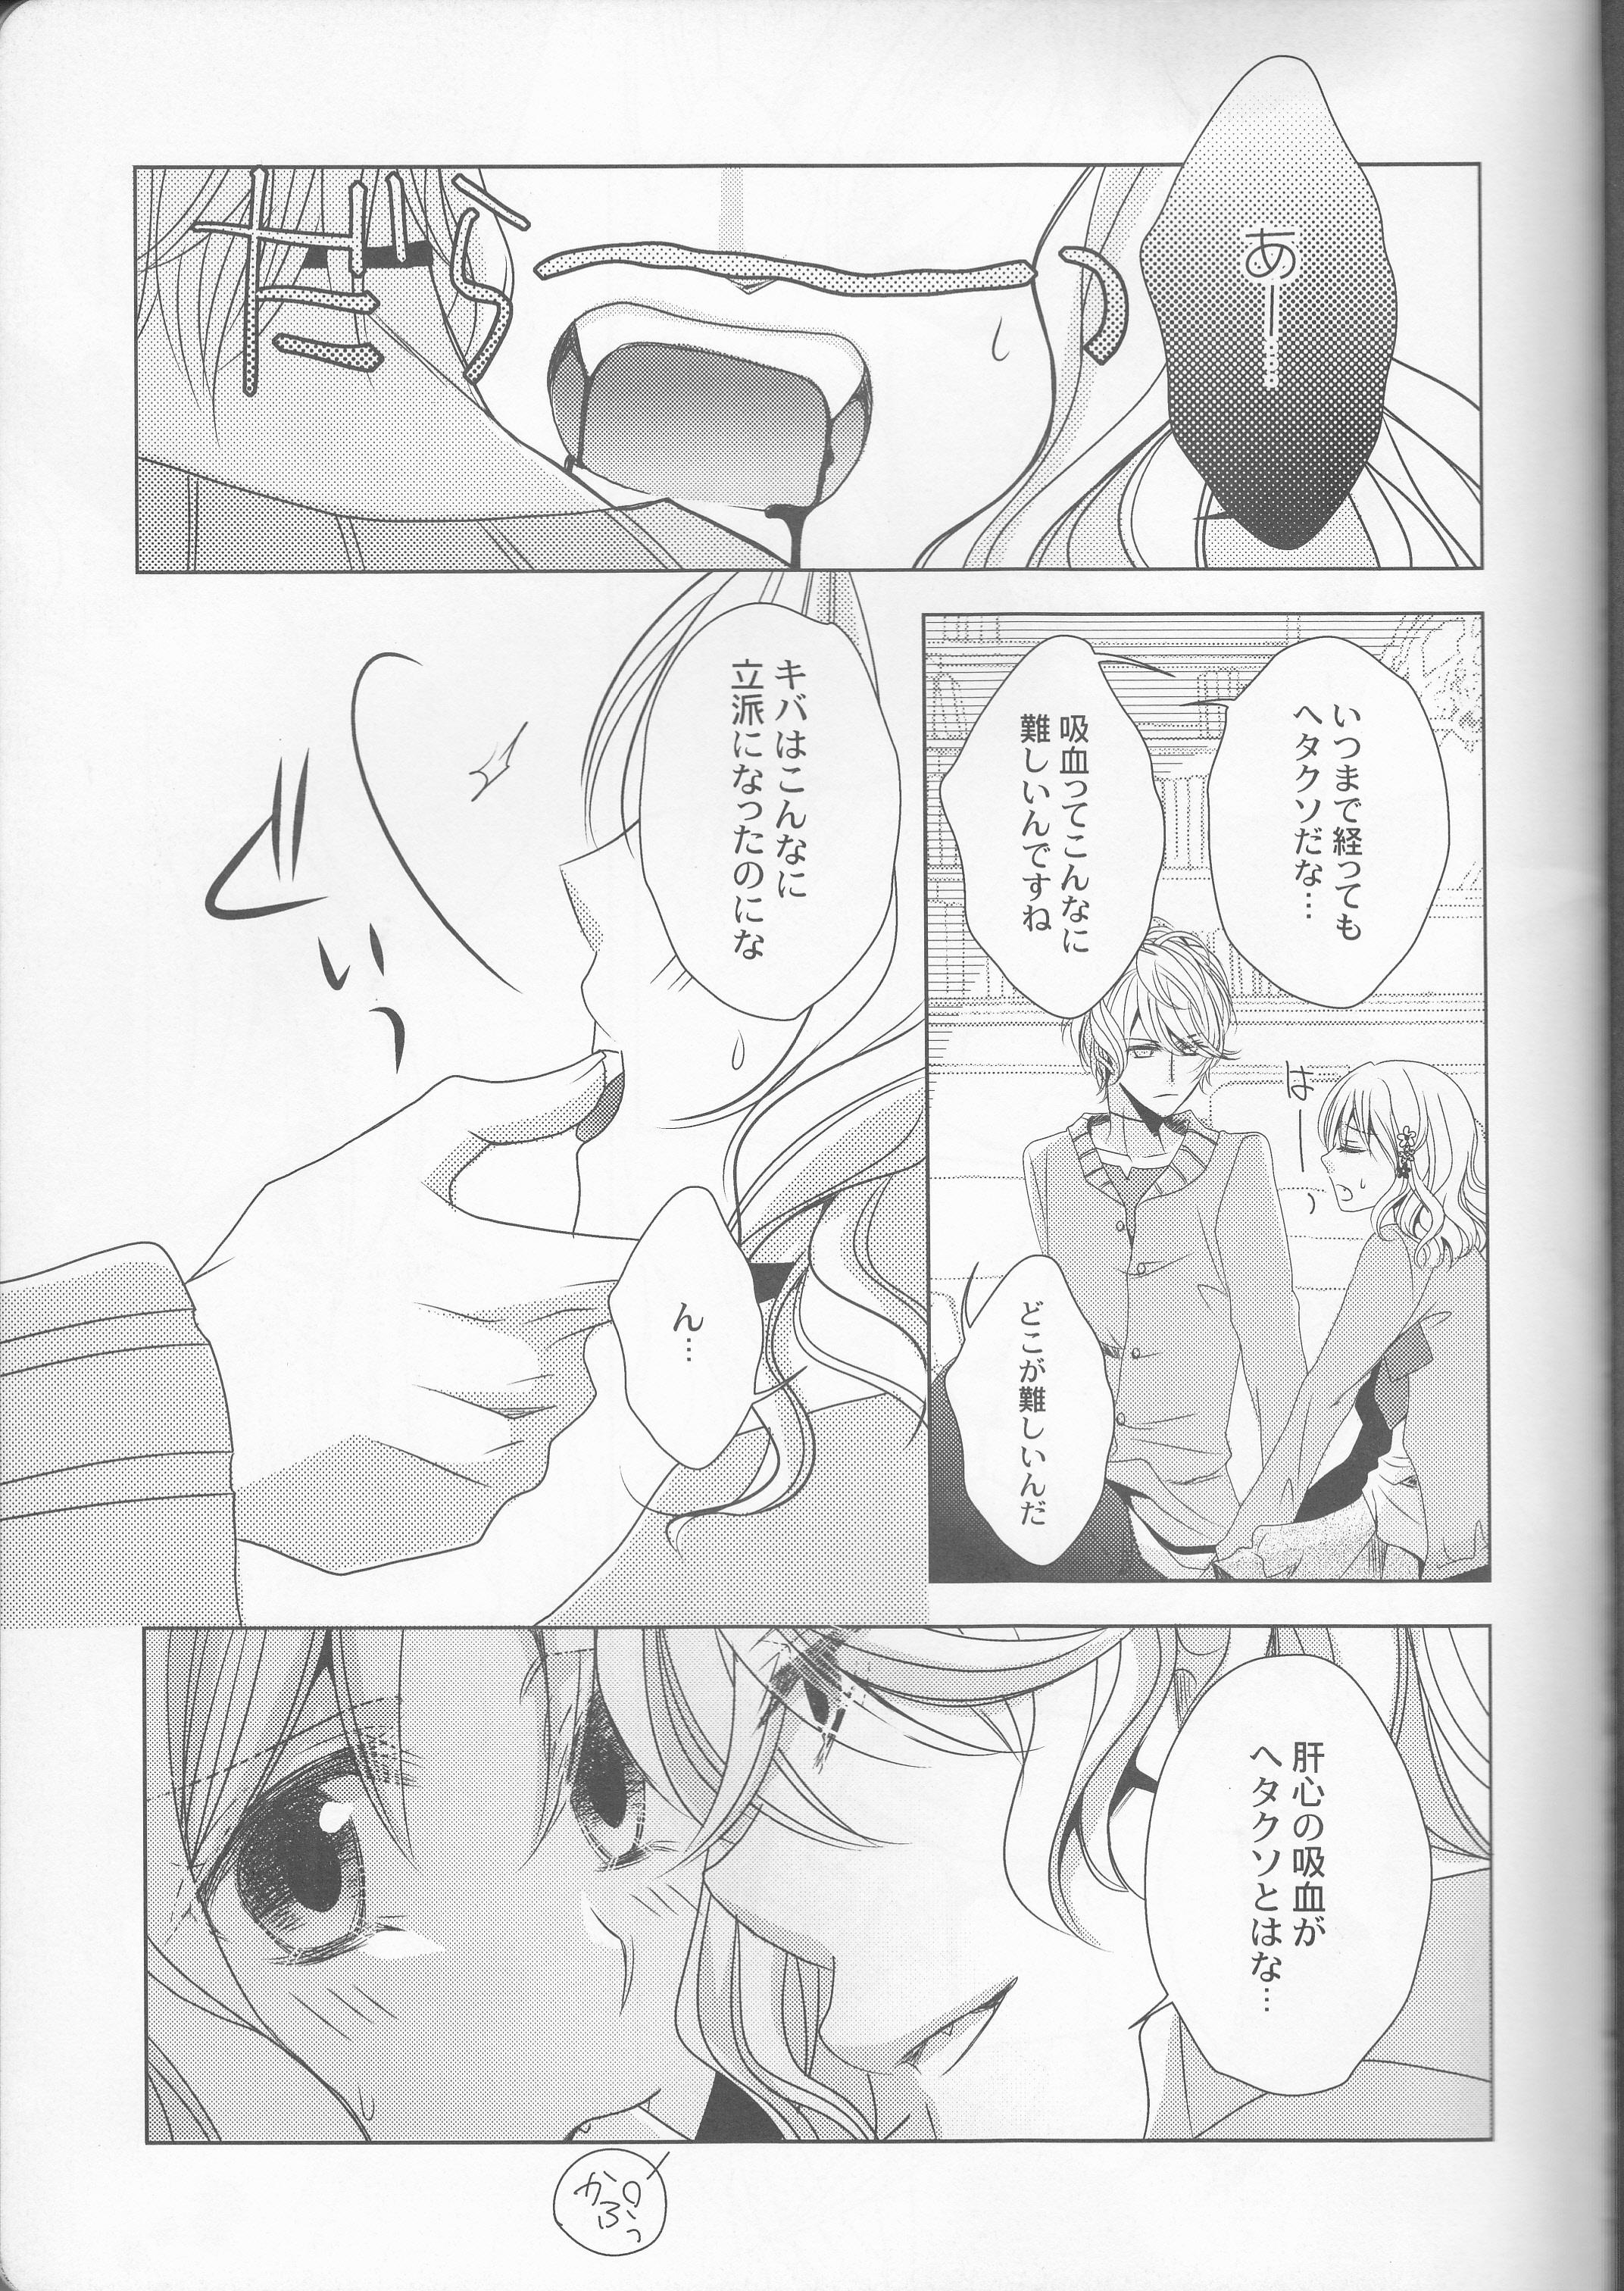 Young Petite Porn How to Blood - Diabolik lovers Por - Page 5